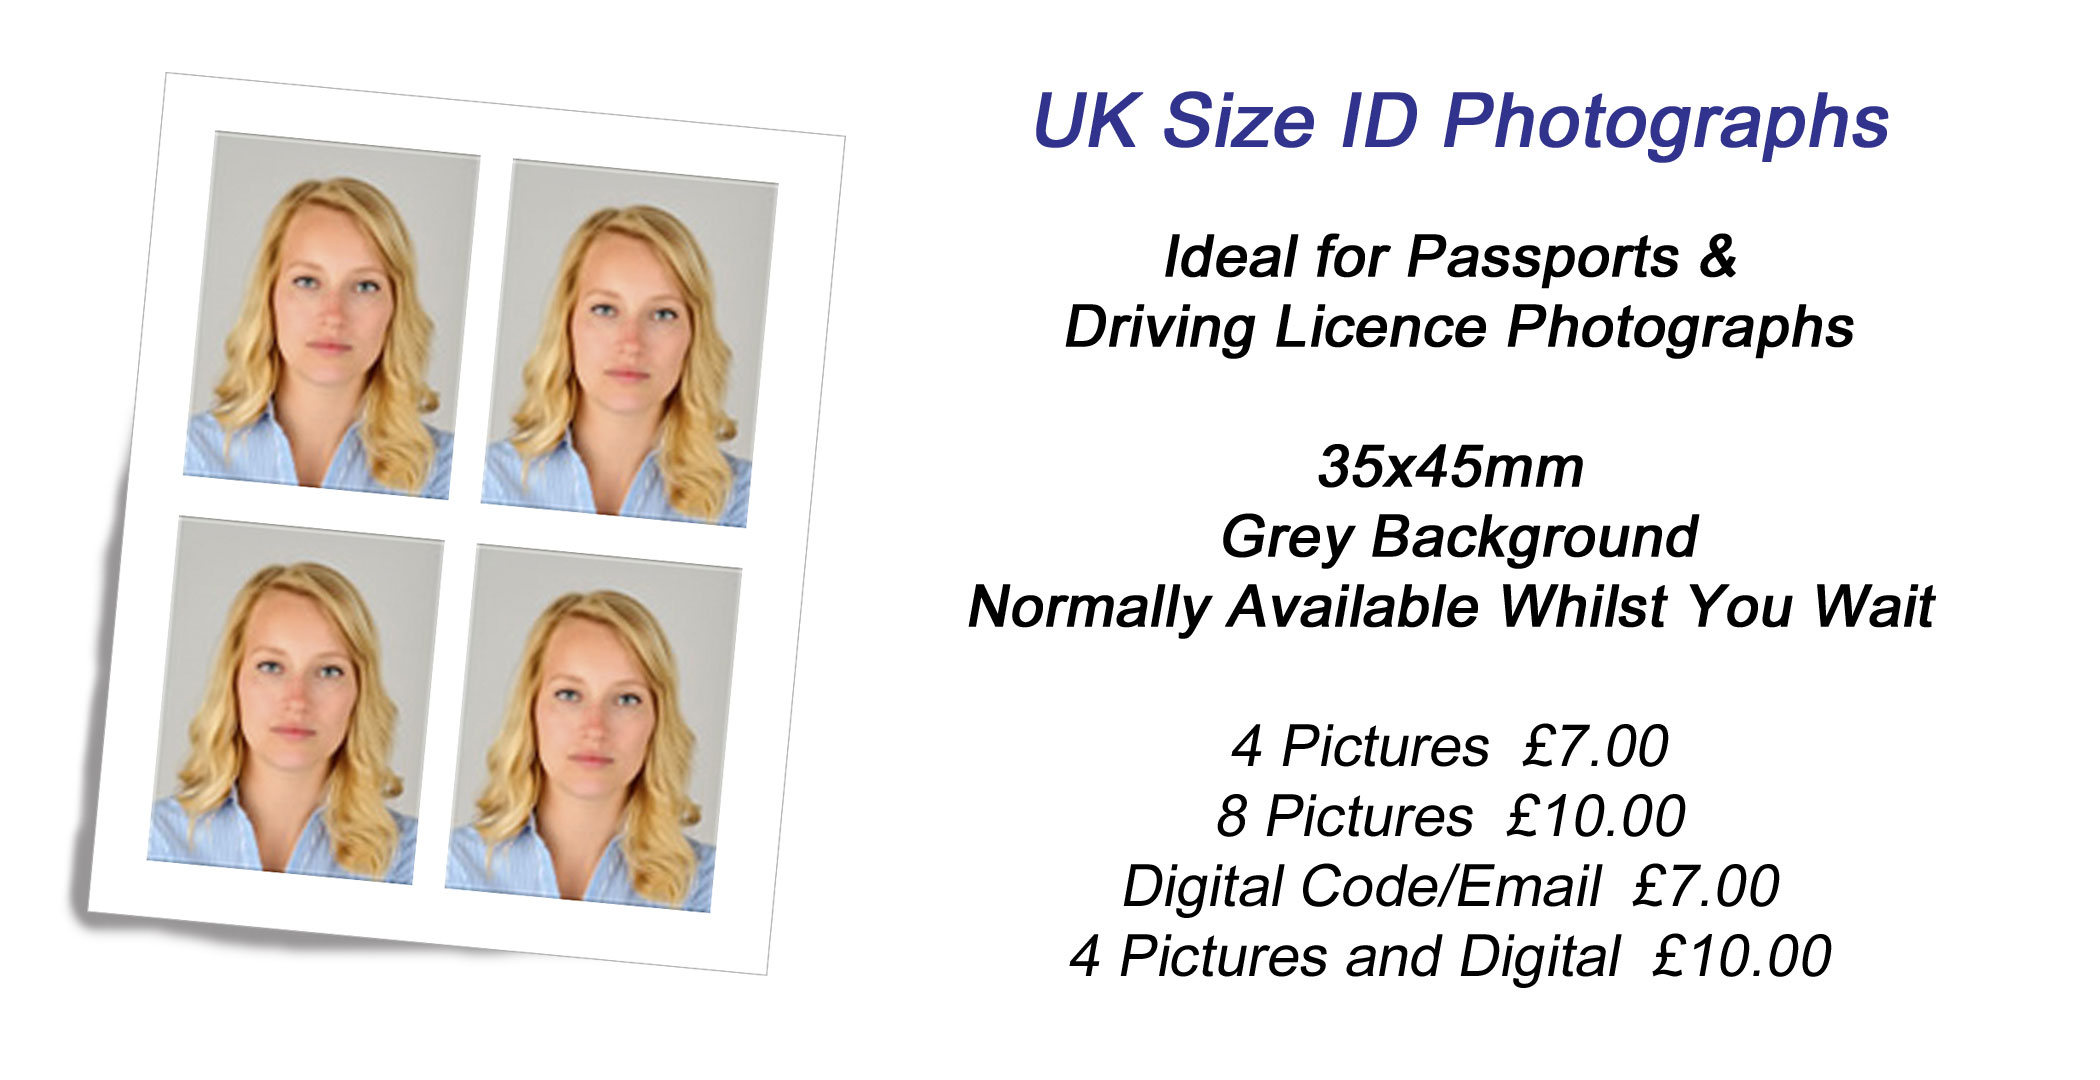 UK Size ID Photographs. Ideal for Passport and Driving Licence. 35x45mm, Grey Background.